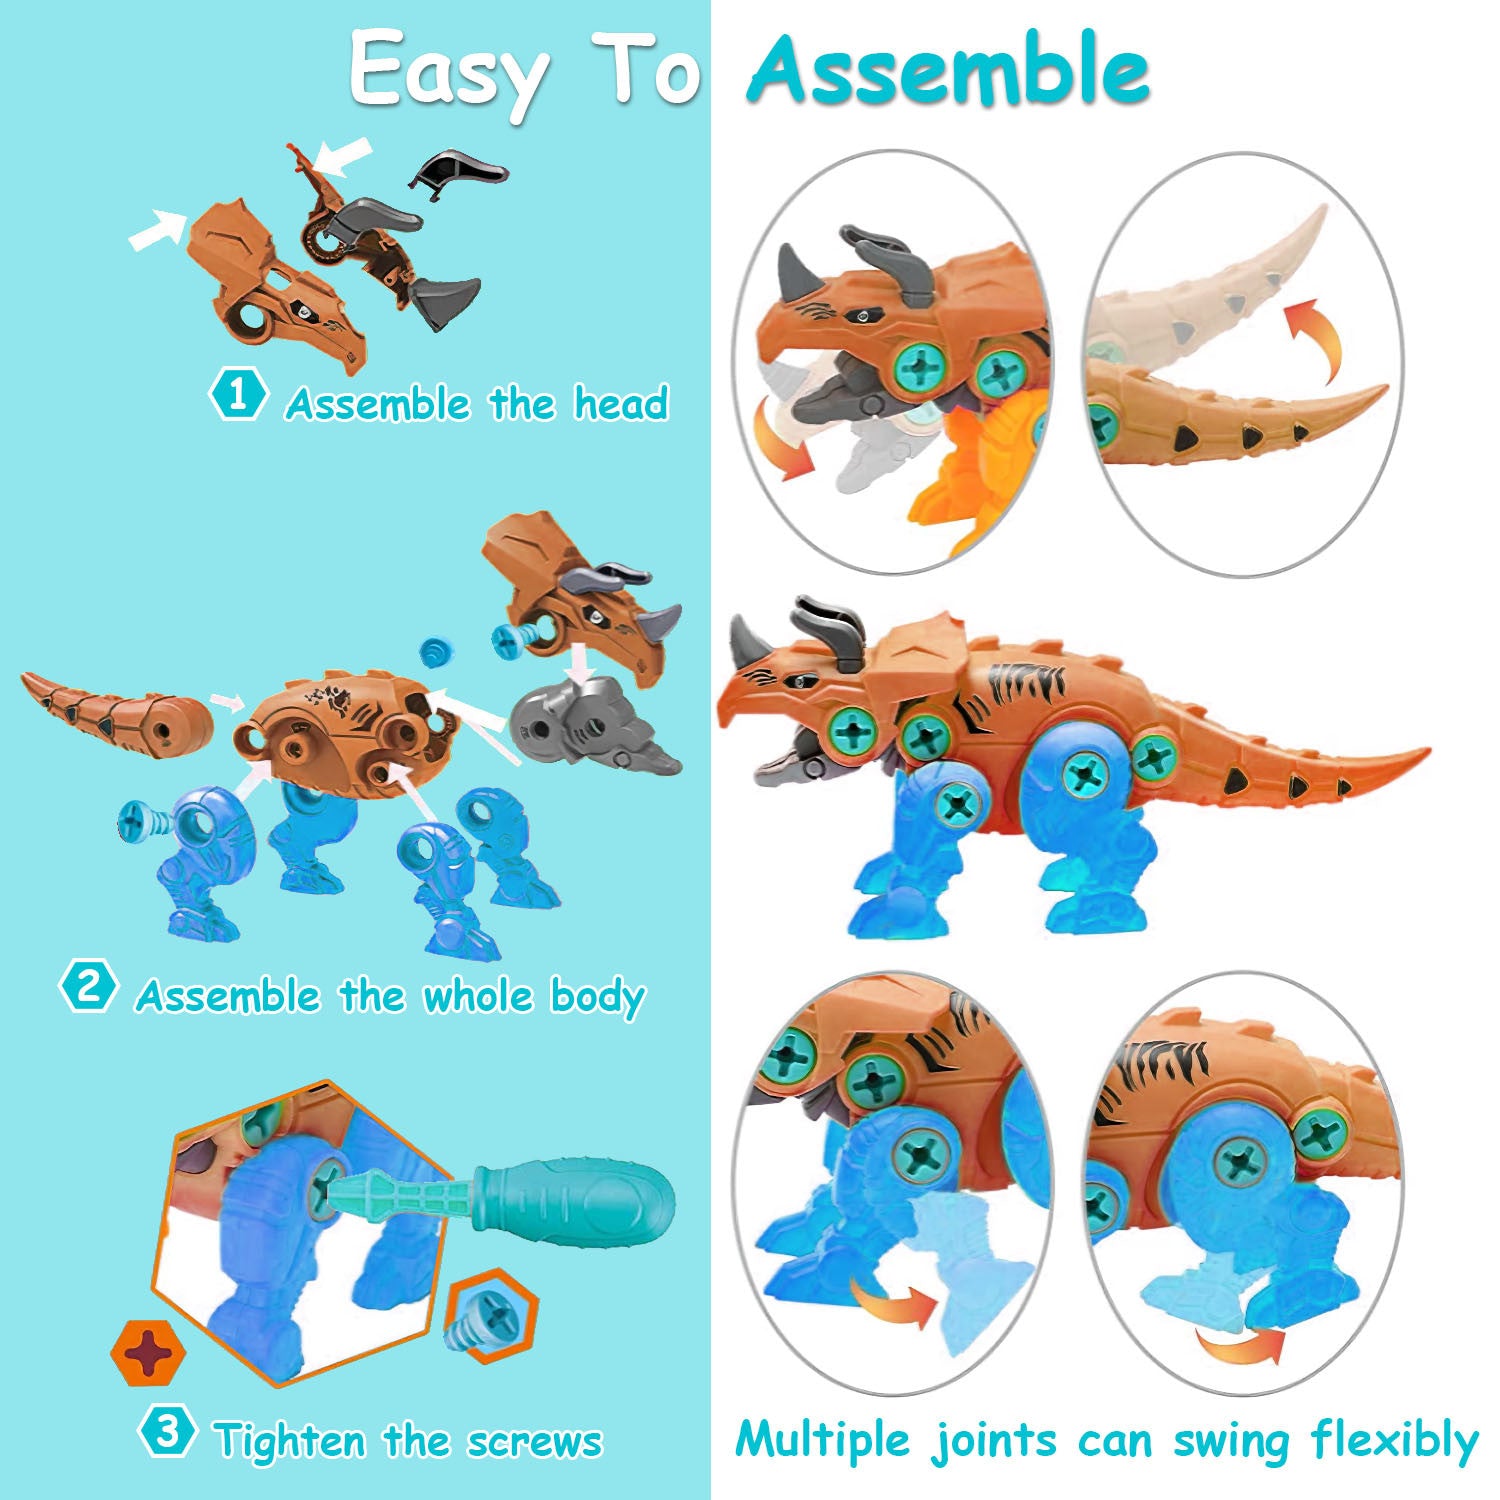 A set of Take Apart Dinosaur Toys DIY Dinosaur Construction Building Block Assembly Toys with Electric Drill for Kids 3 to 7 Year Old with safe materials.